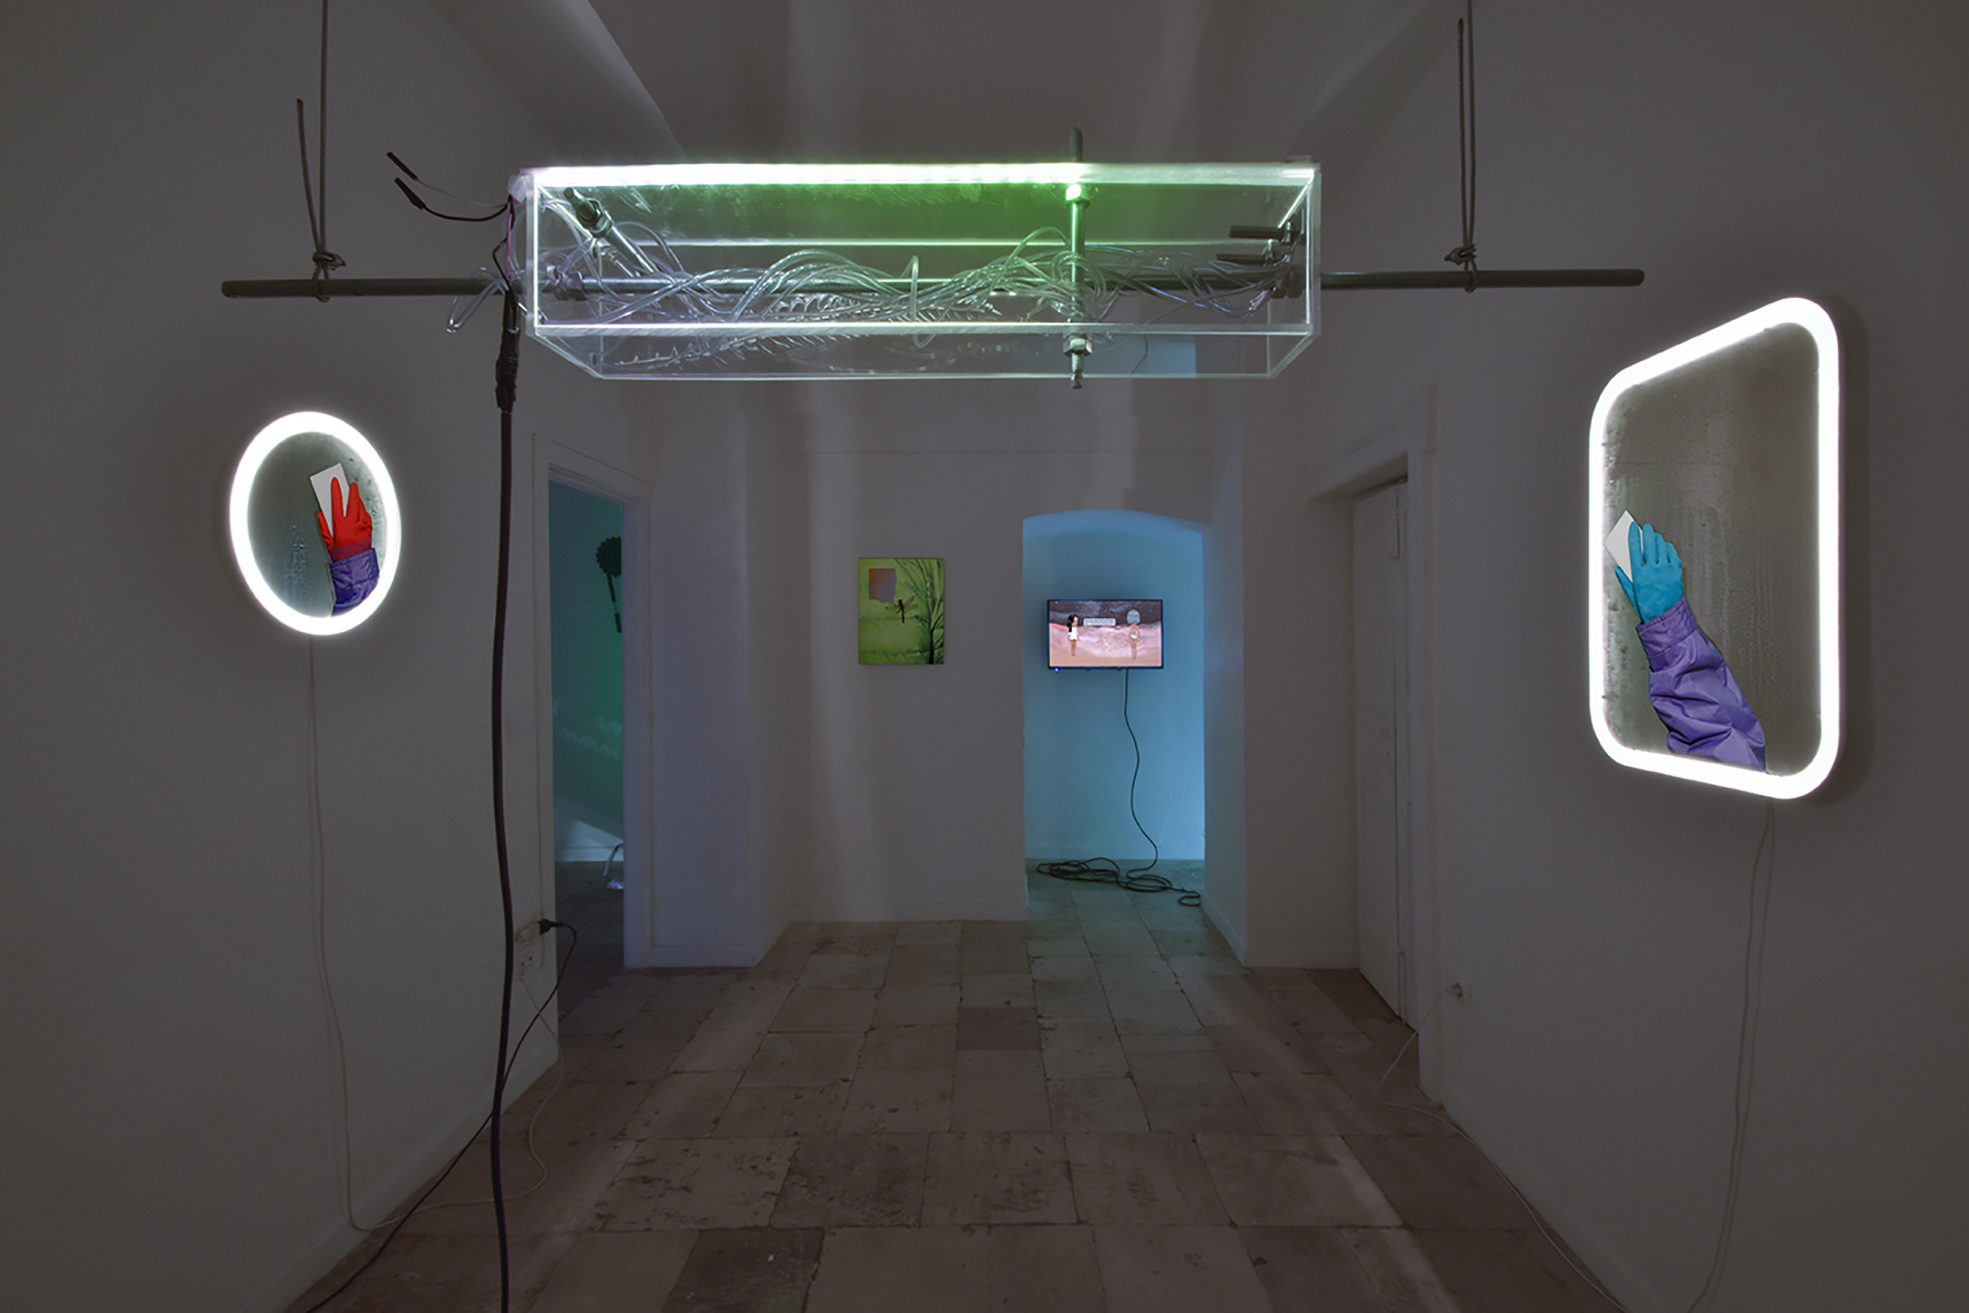 Everytime you switch me off, I die. A little. Installation view.